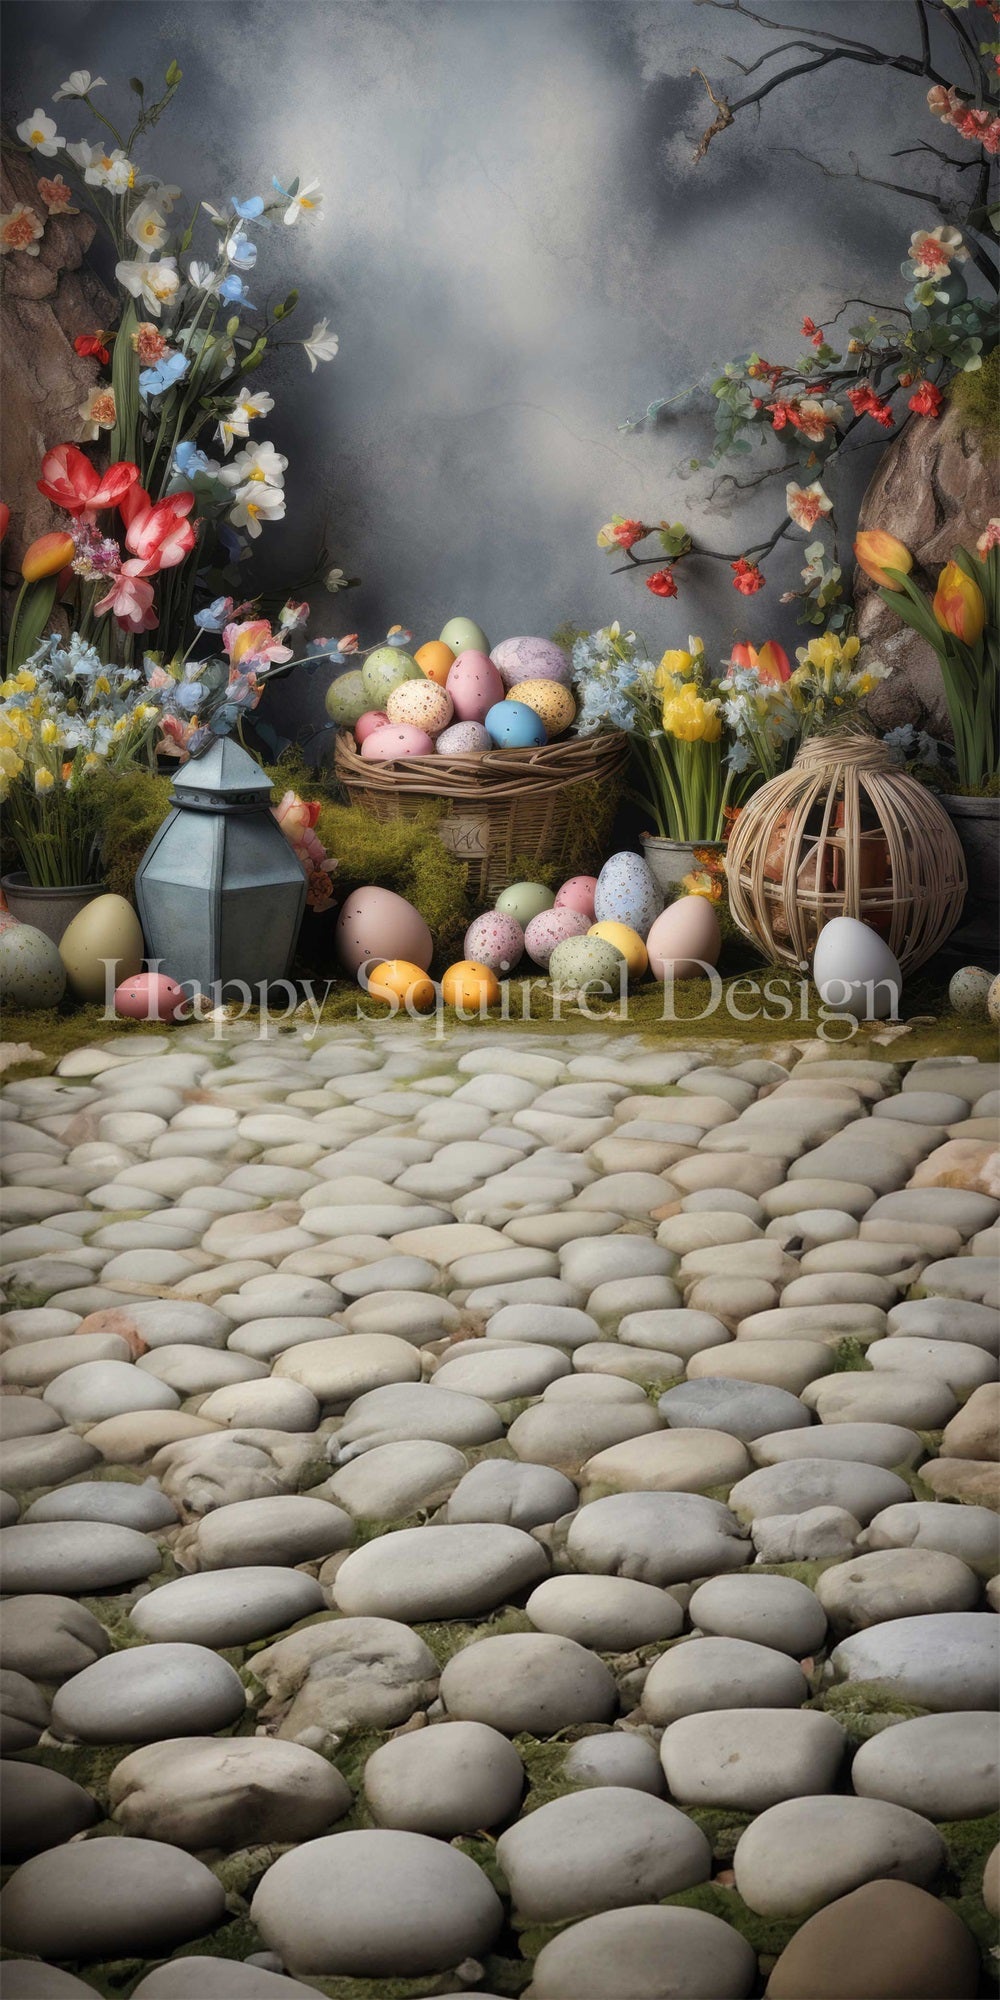 Kate Sweep Spring Indoor Easter Eggs Colorful Flower Brown Stone Pebble Grey Wall Backdrop Designed by Happy Squirrel Design